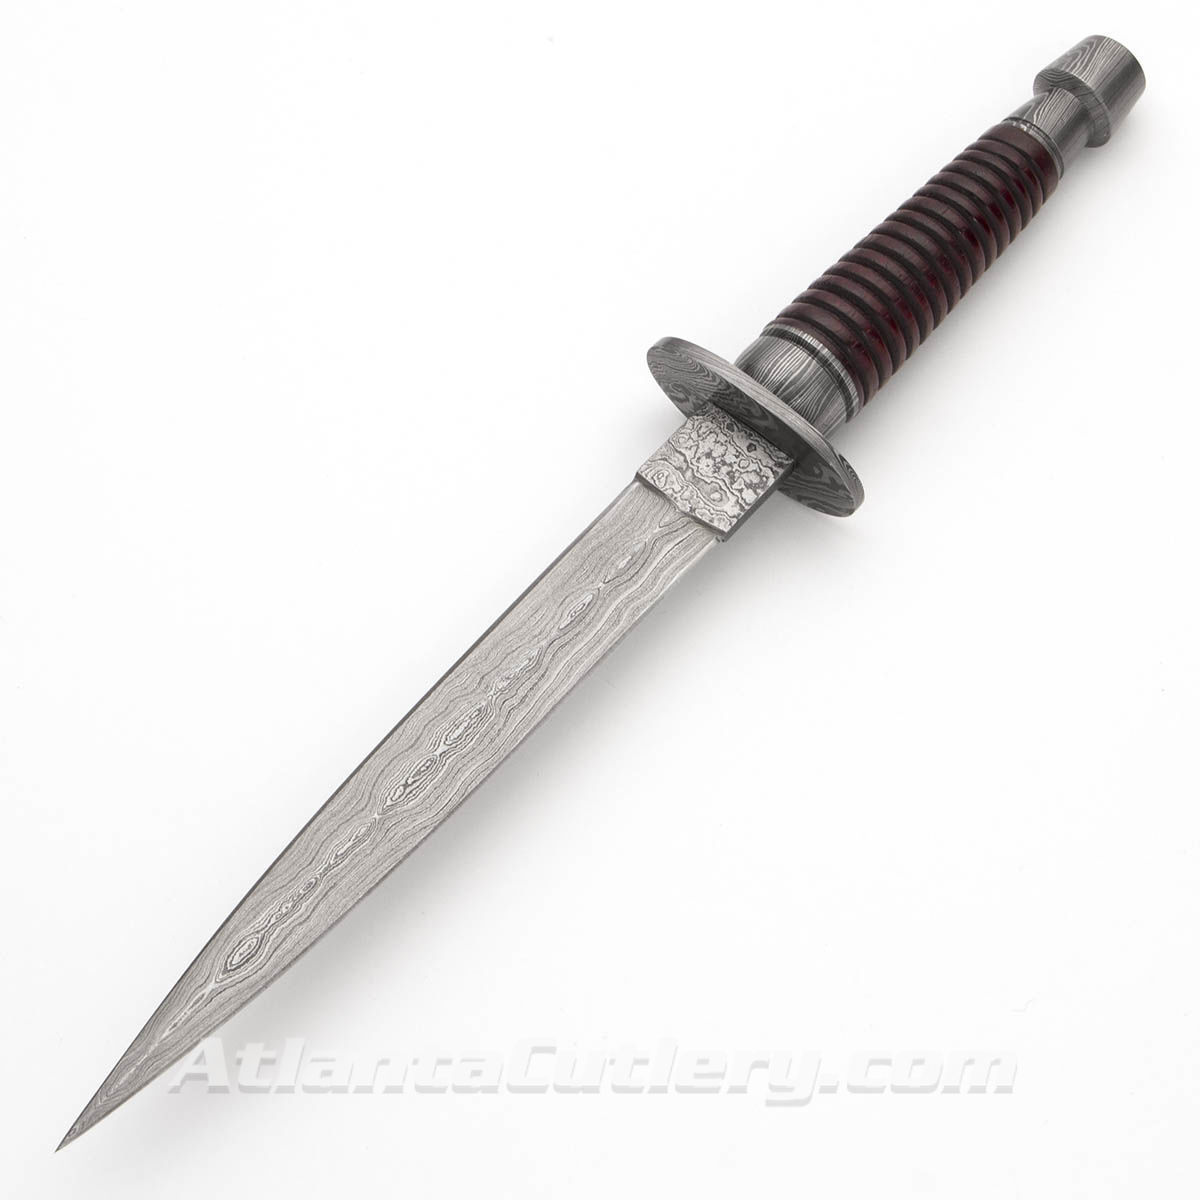 Commando Dagger made of Damascus steel with wood grip, and Damascus guard and pommel